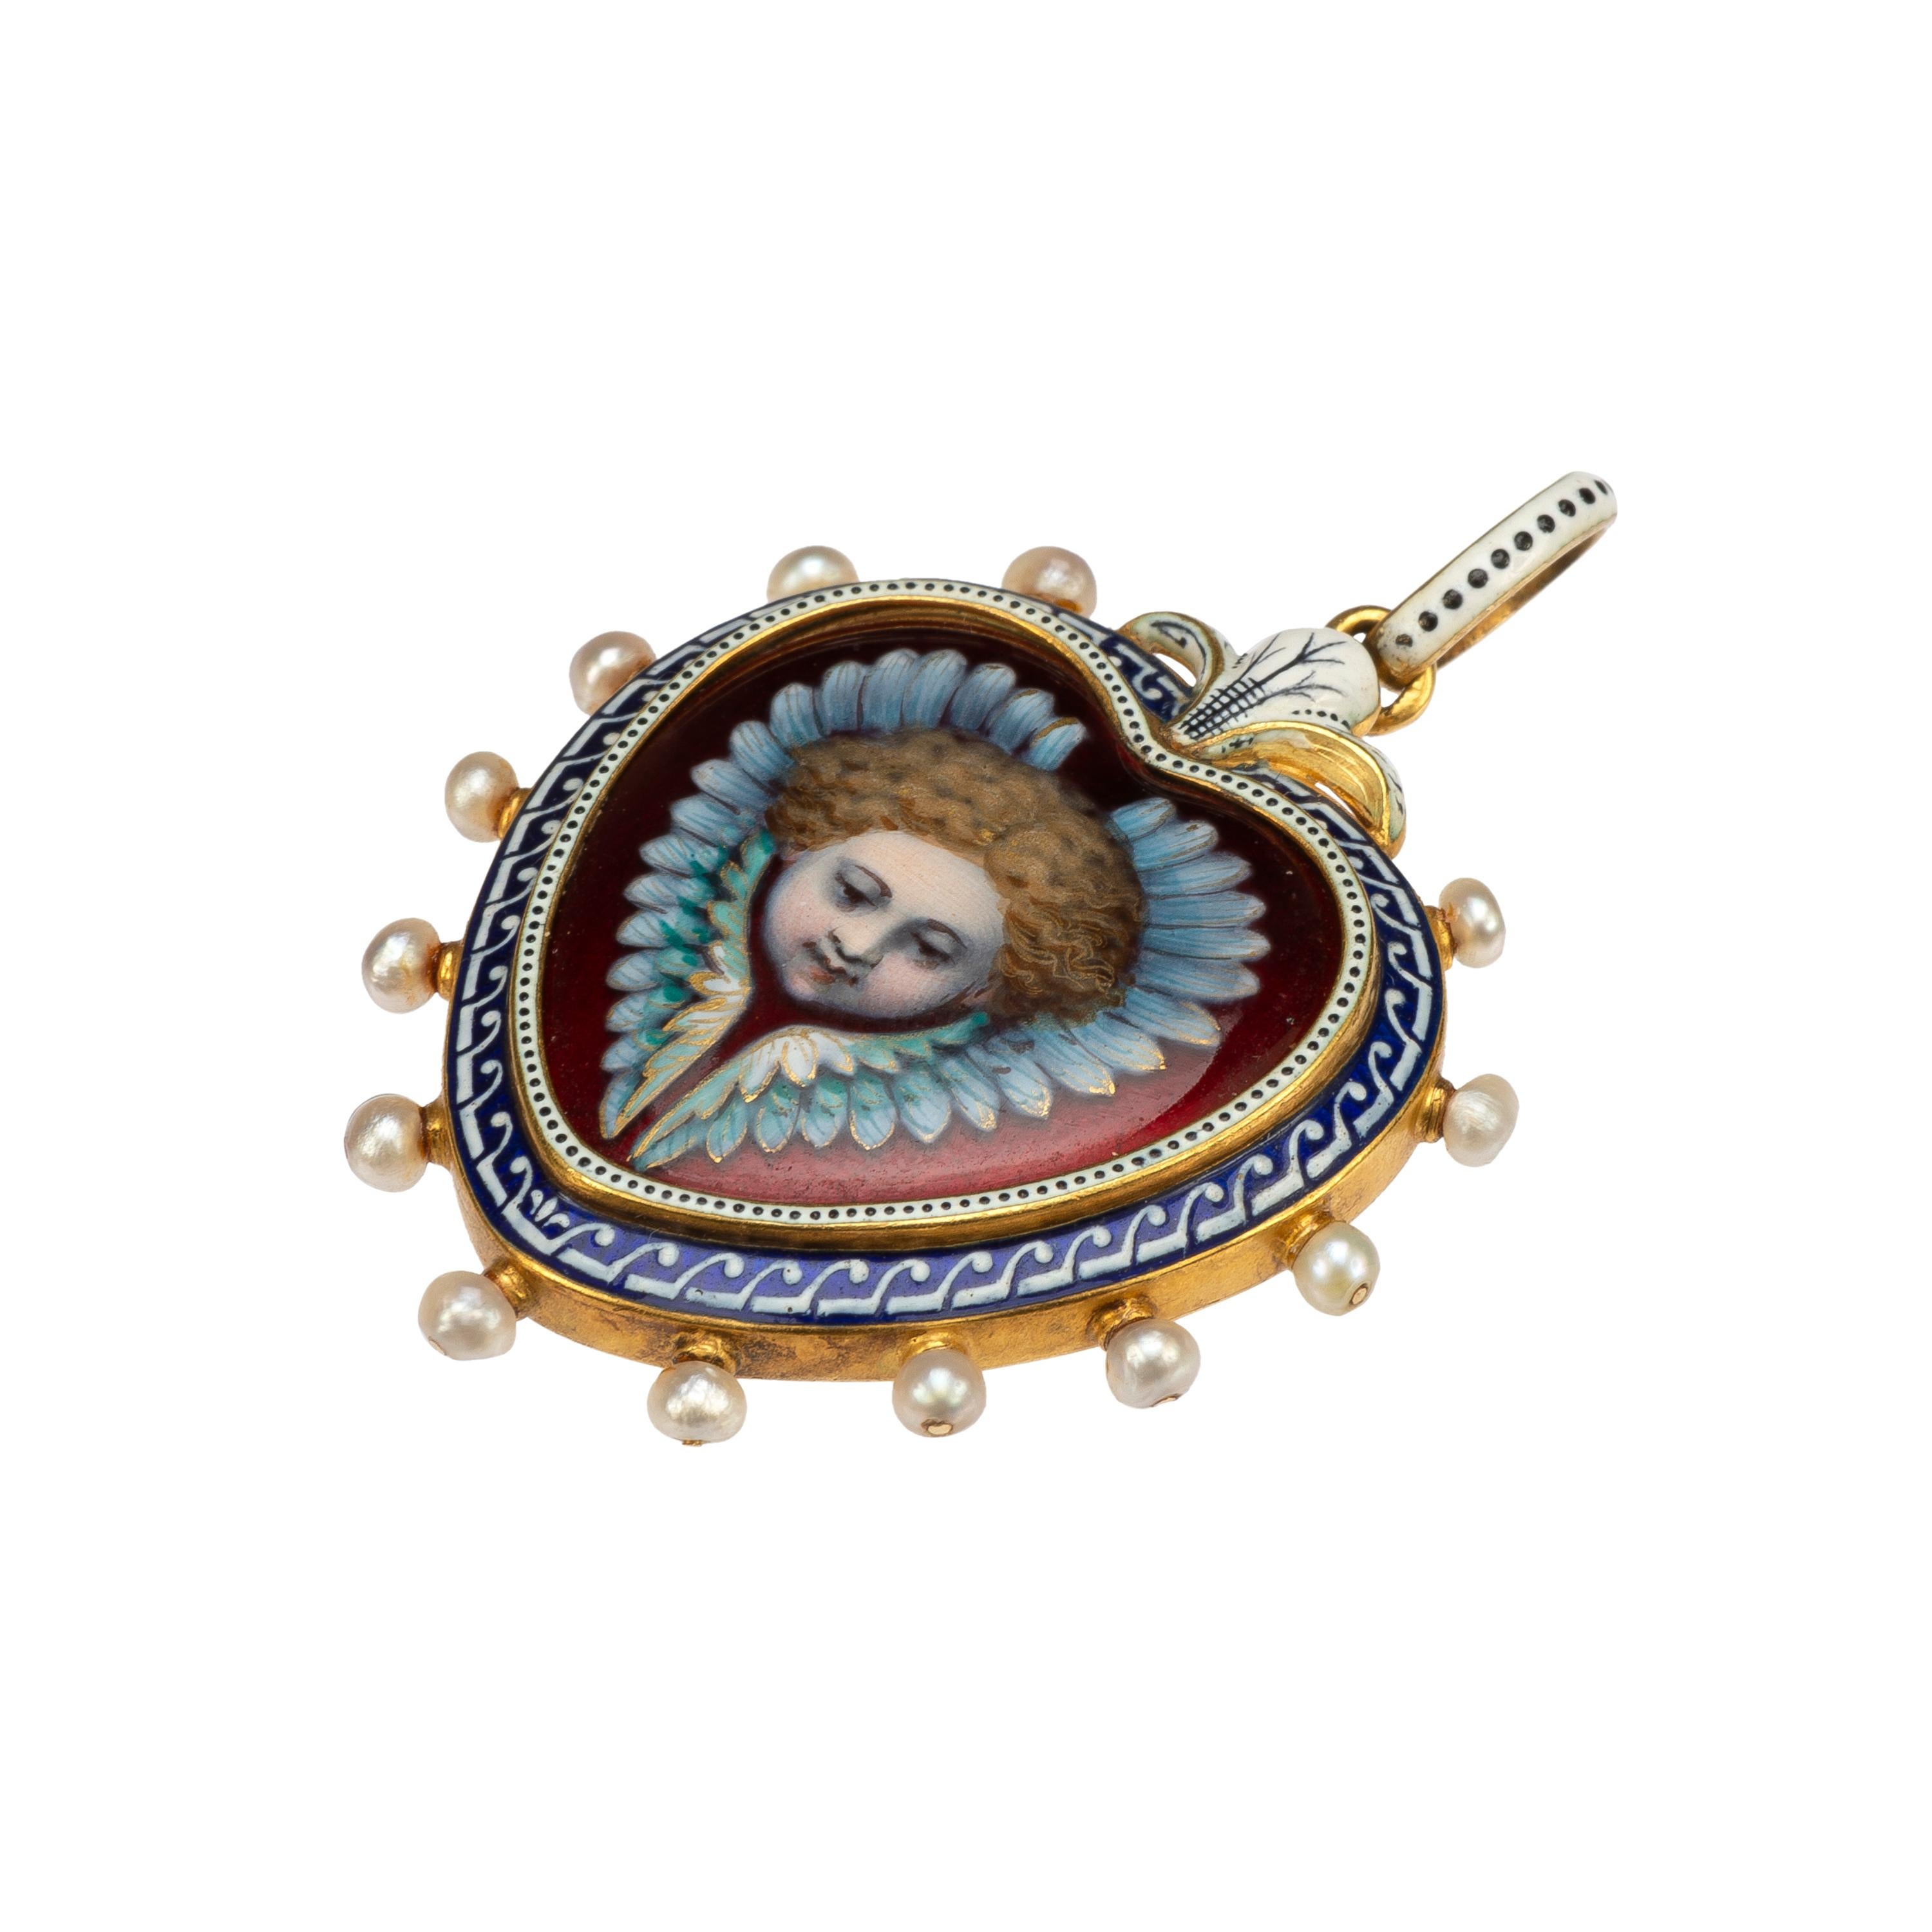 Carlo Giuliano 
HEART-SHAPED PENDANT WITH CHERUB
England (London), c. 1880
Gold, enamel, seed pearls
Weight 8.6 gr.; Height 33.3 (42.1 with loop) mm; Width 30.8 mm;

Of all the Revivalist jewelers, the versatile Carlo Giuliano may be the most